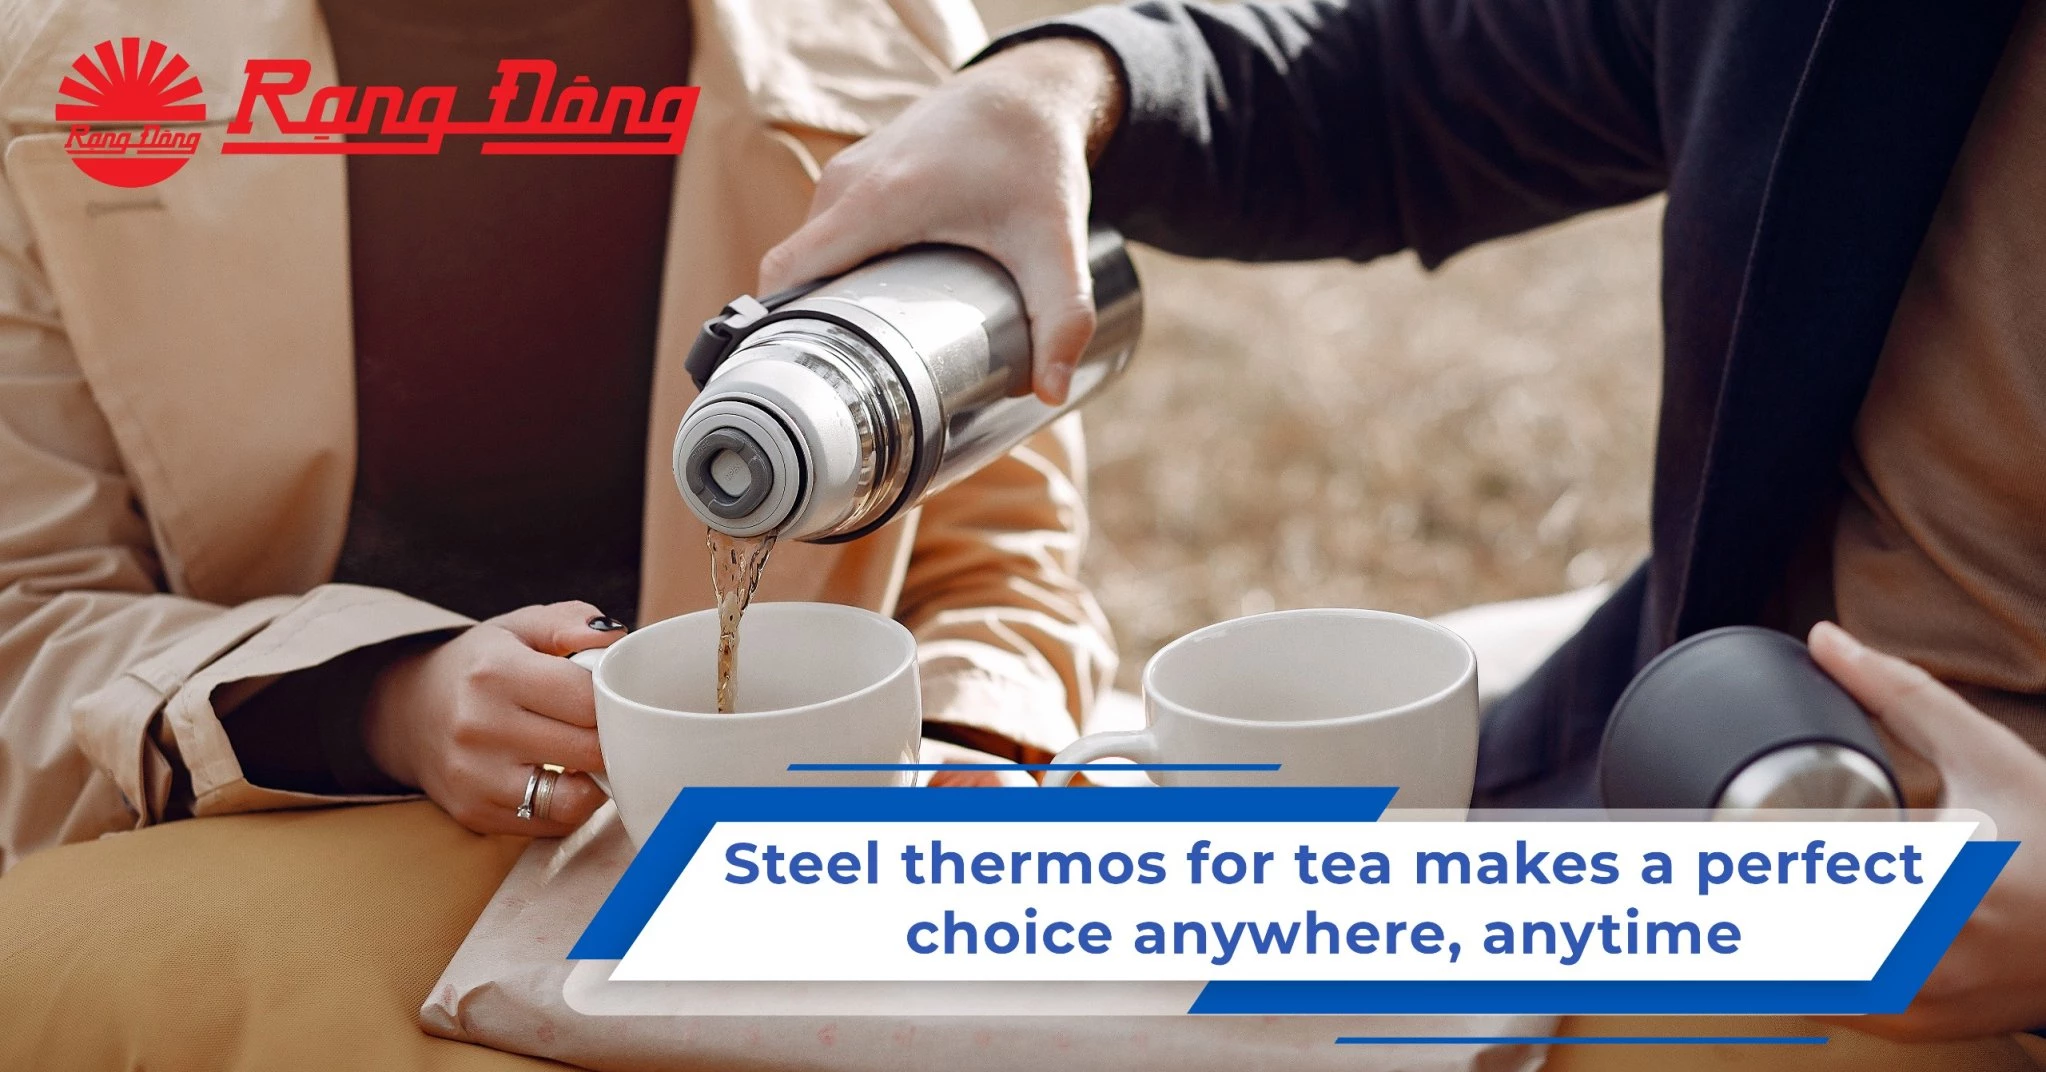 Steel thermos for tea makes a perfect choice anywhere, anytime